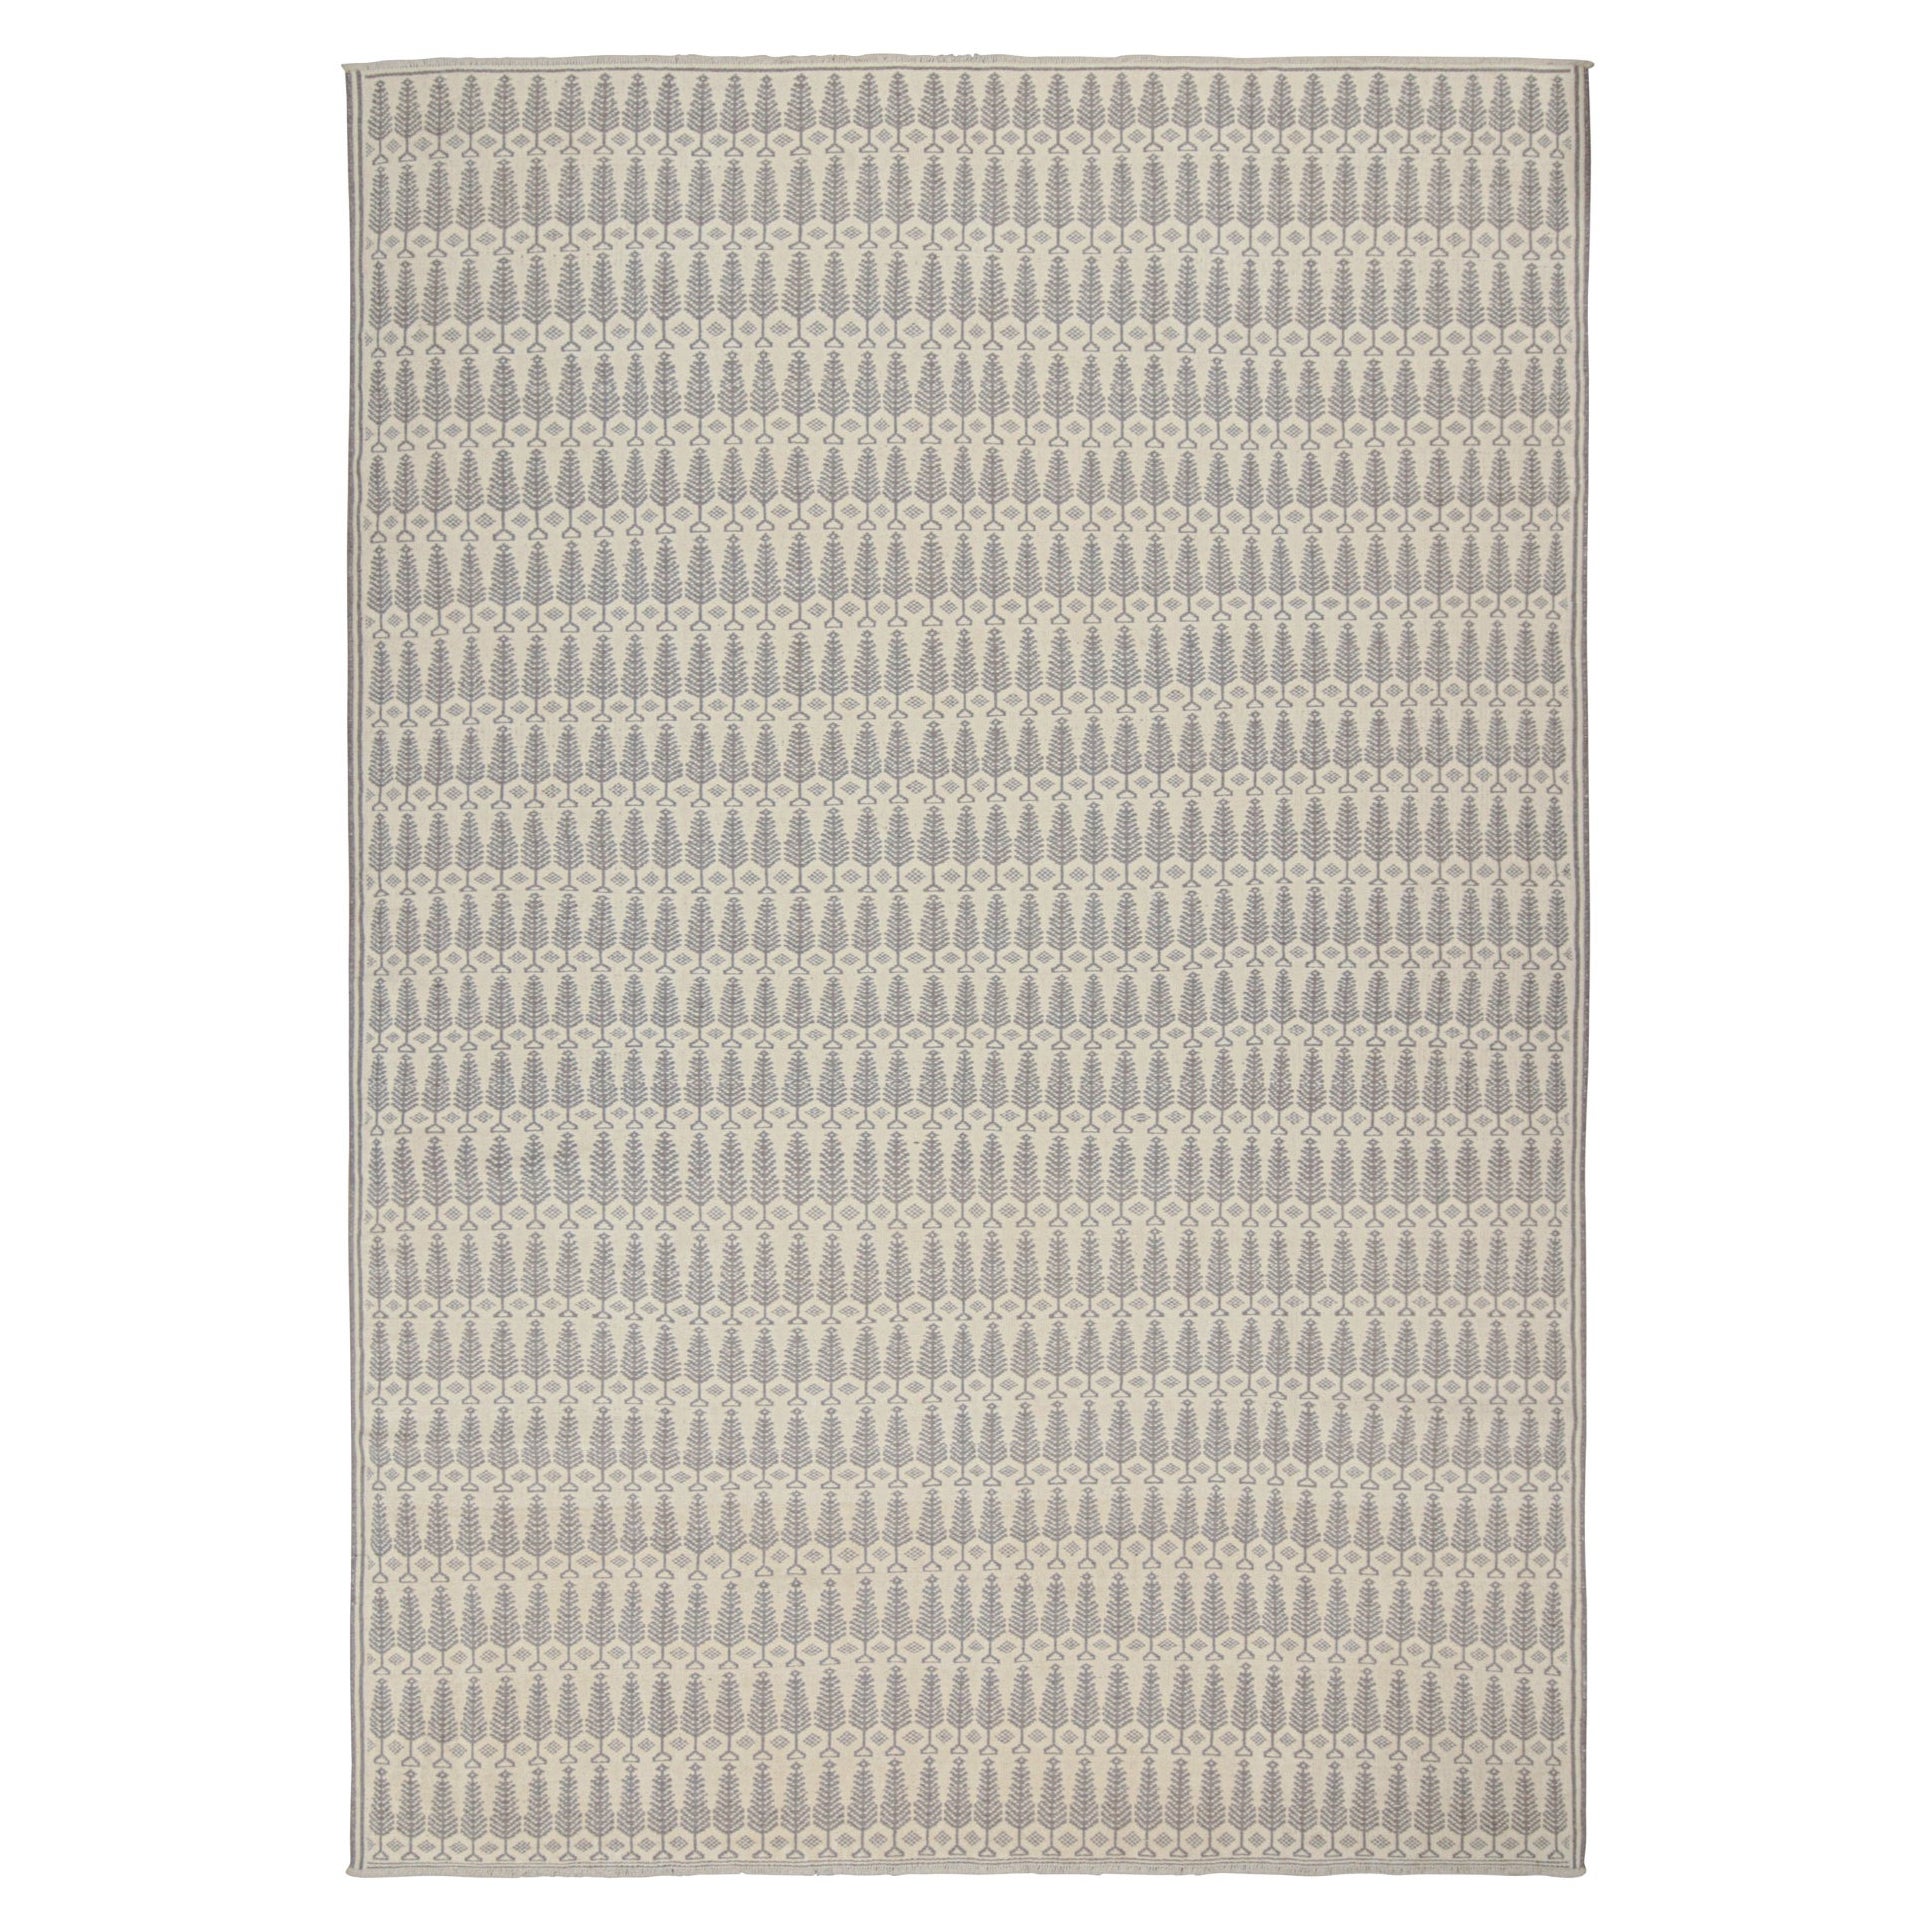 Rug & Kilim’s Zilu Style Kilim in White with Gray Floral Pattern For Sale